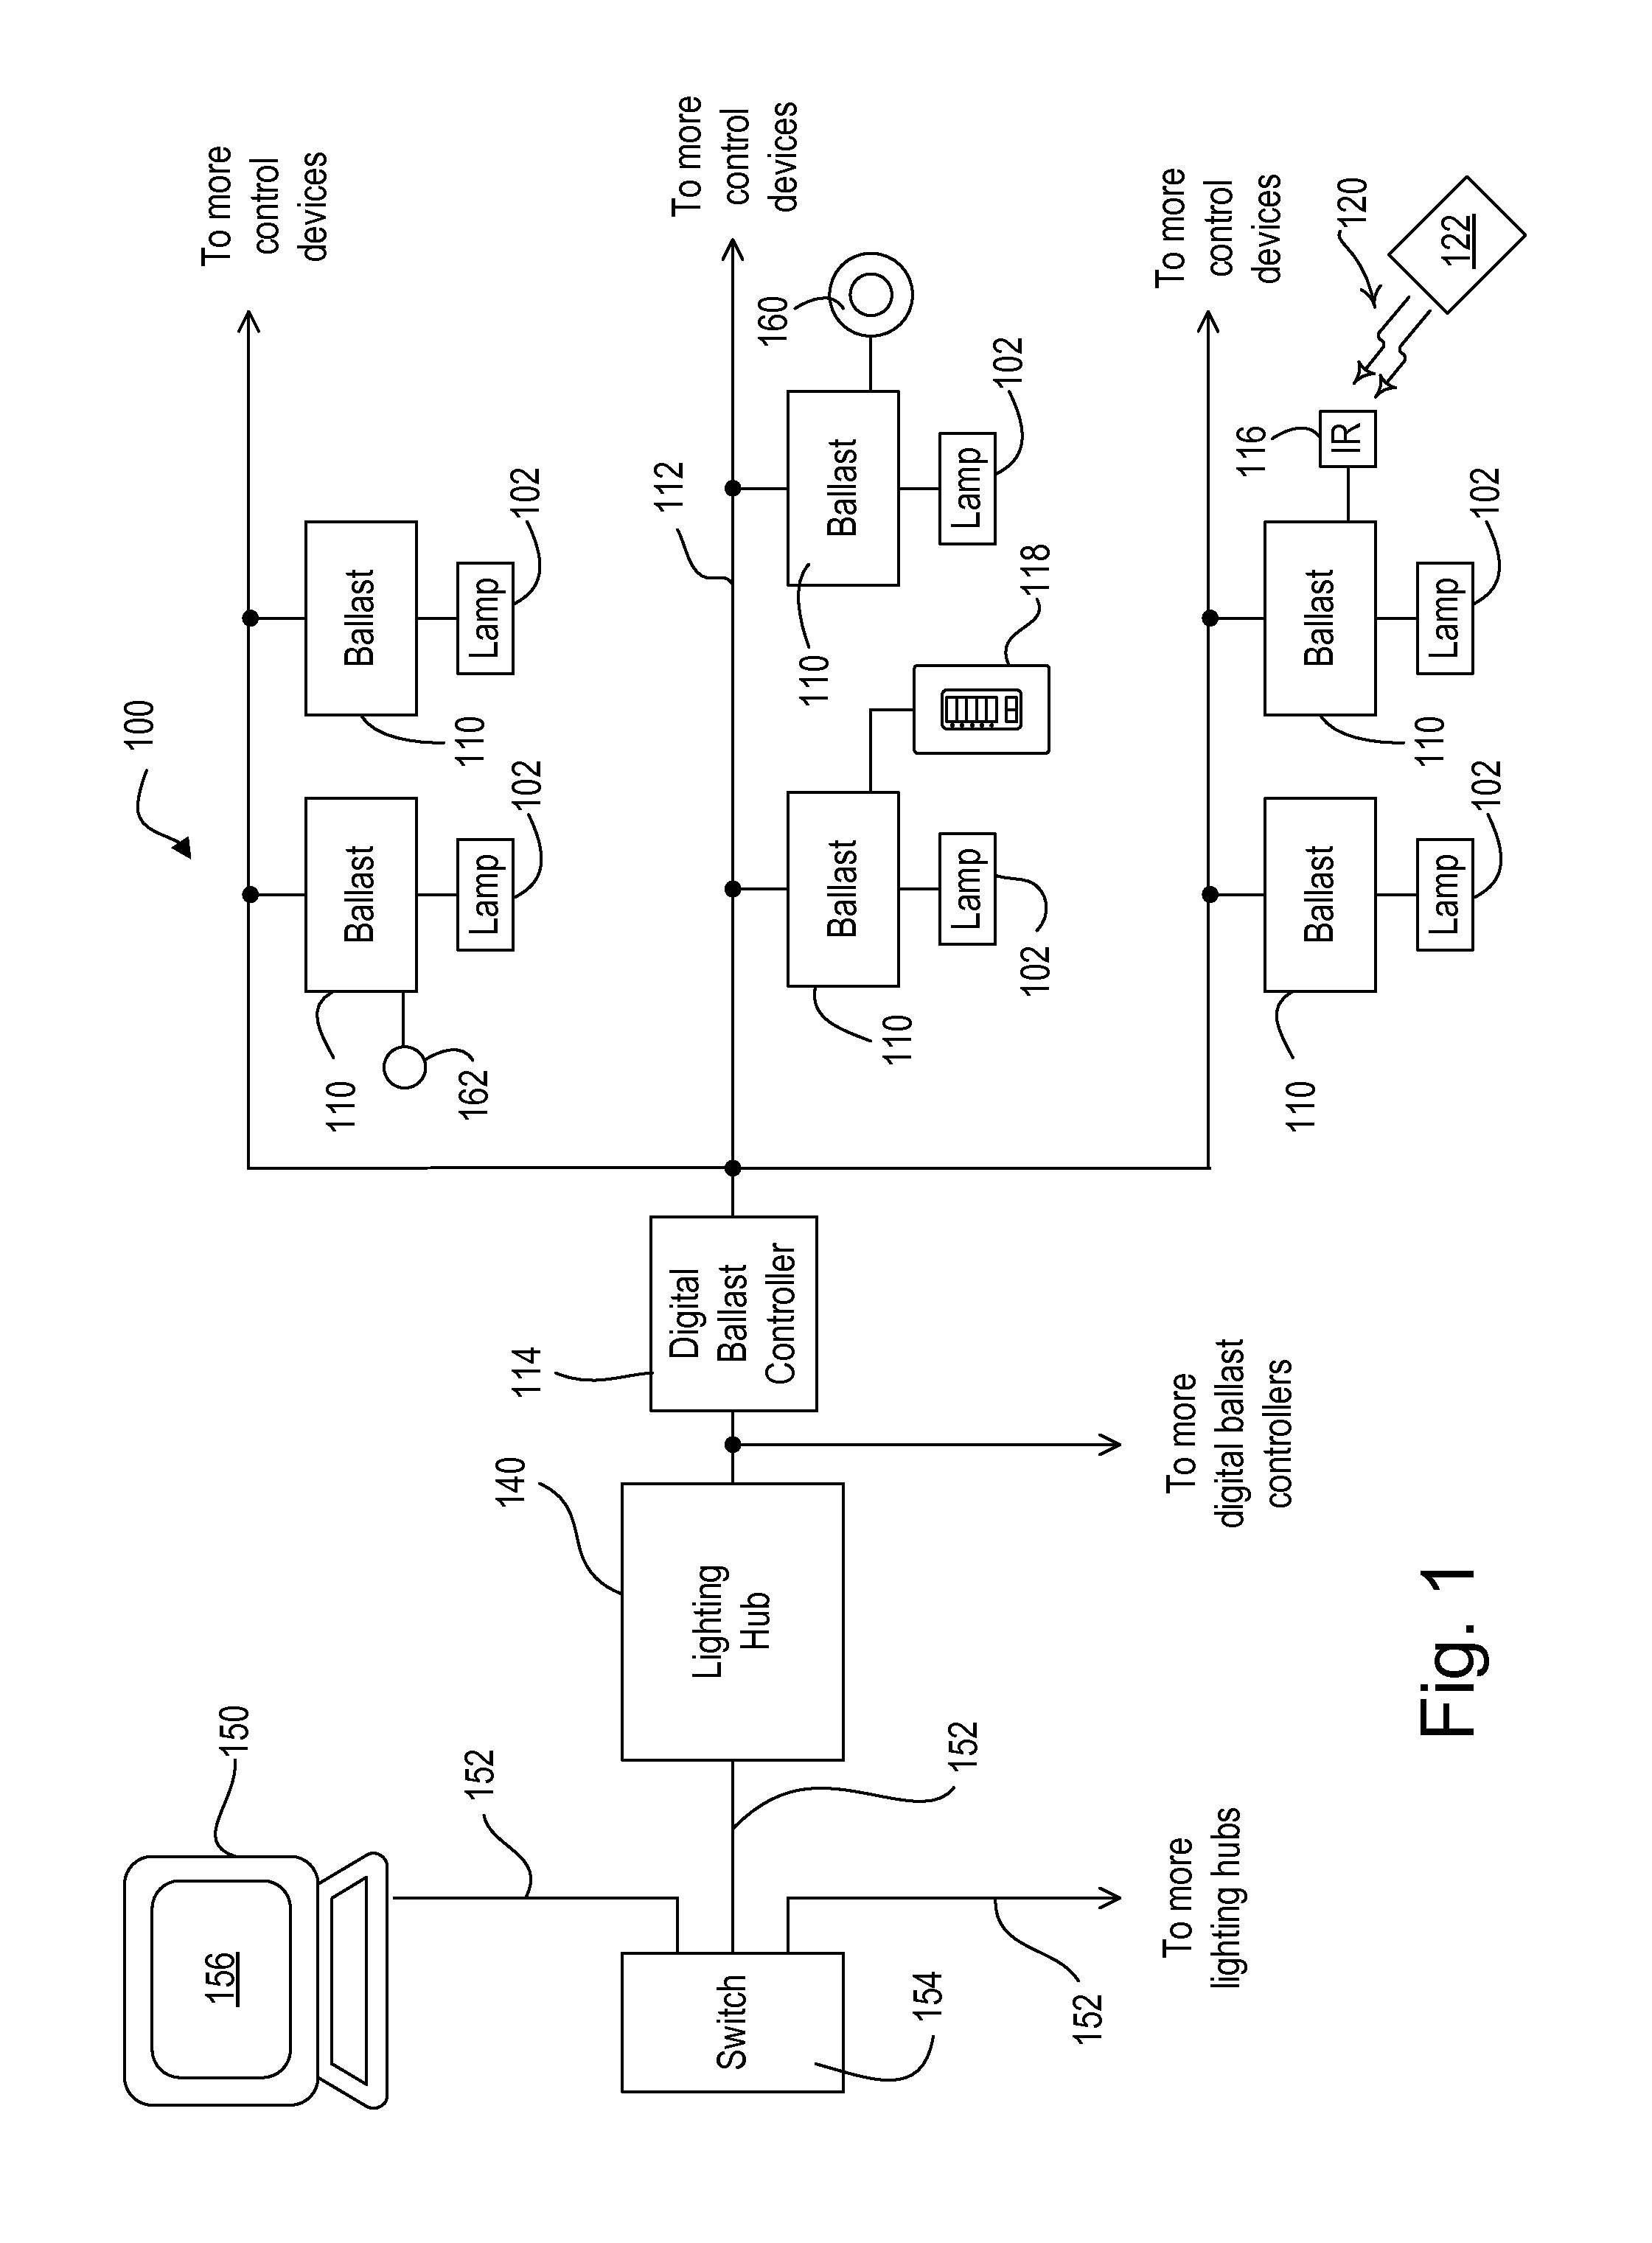 Method of semi-automatic ballast replacement